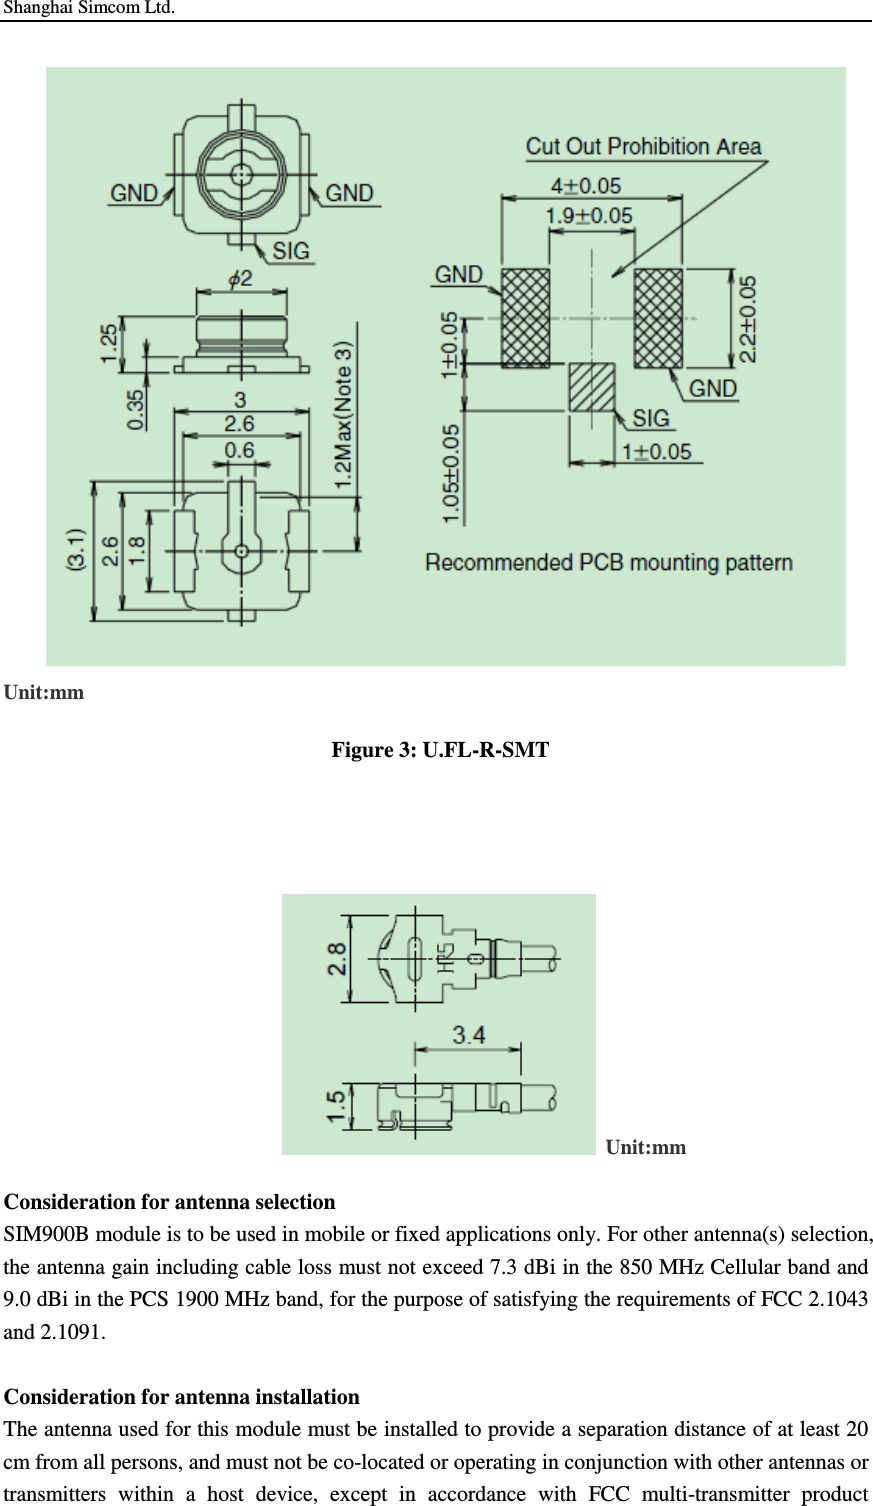 Shanghai Simcom Ltd.  Unit:mm  Figure 3: U.FL-R-SMT           Unit:mm Consideration for antenna selection SIM900B module is to be used in mobile or fixed applications only. For other antenna(s) selection,   the antenna gain including cable loss must not exceed 7.3 dBi in the 850 MHz Cellular band and 9.0 dBi in the PCS 1900 MHz band, for the purpose of satisfying the requirements of FCC 2.1043 and 2.1091.    Consideration for antenna installation The antenna used for this module must be installed to provide a separation distance of at least 20 cm from all persons, and must not be co-located or operating in conjunction with other antennas or transmitters  within  a  host  device,  except  in  accordance  with  FCC  multi-transmitter  product 